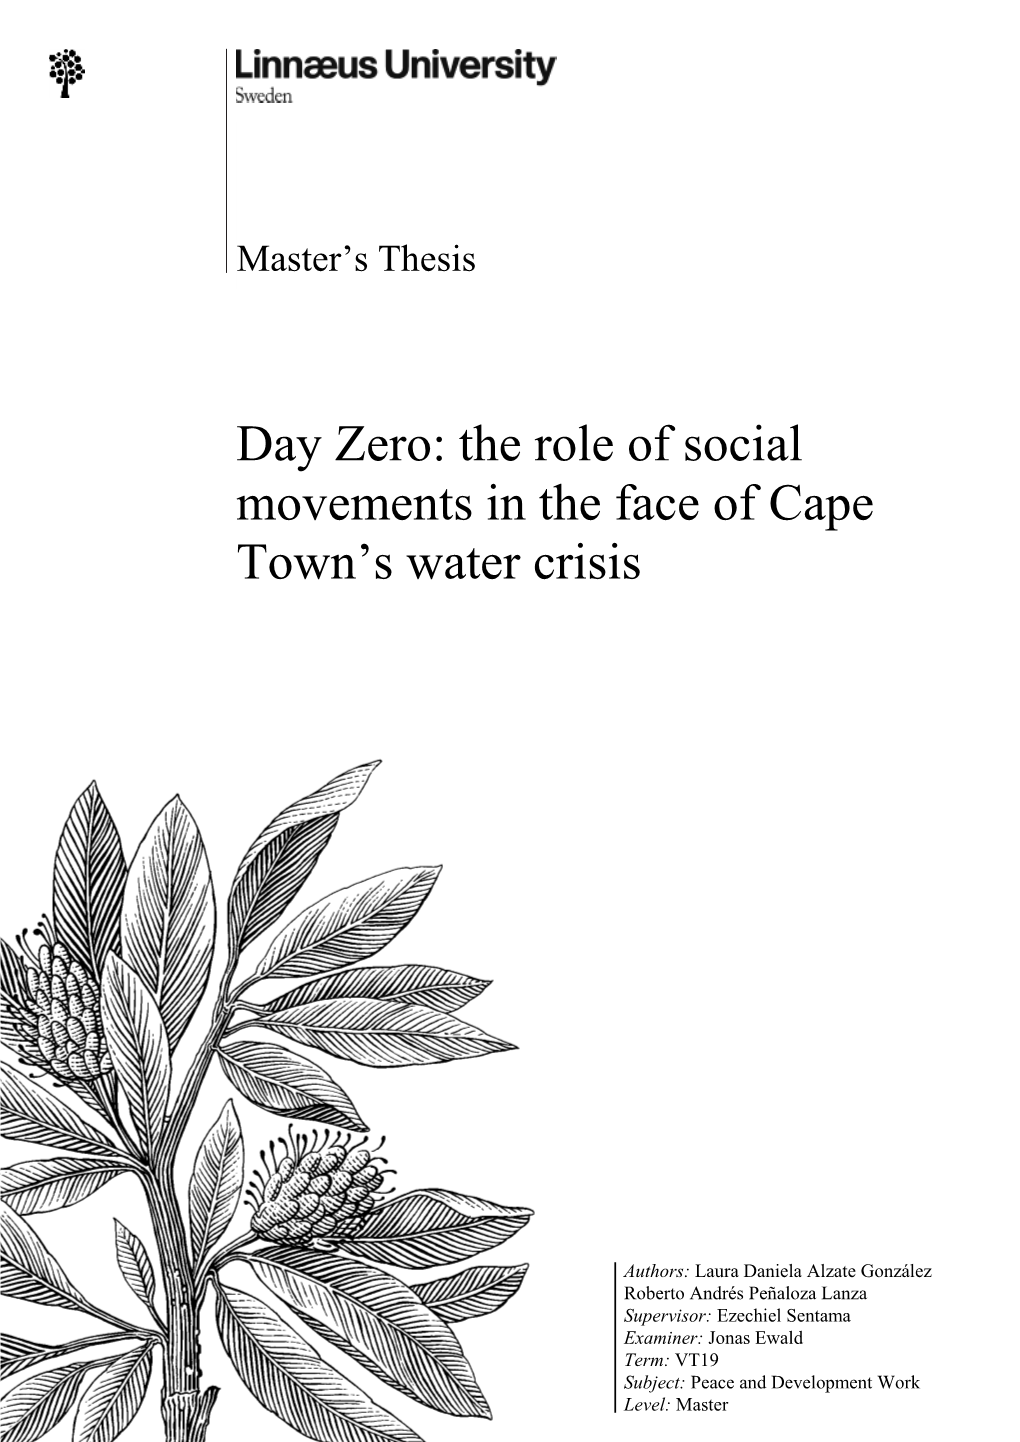 Day Zero: the Role of Social Movements in the Face of Cape